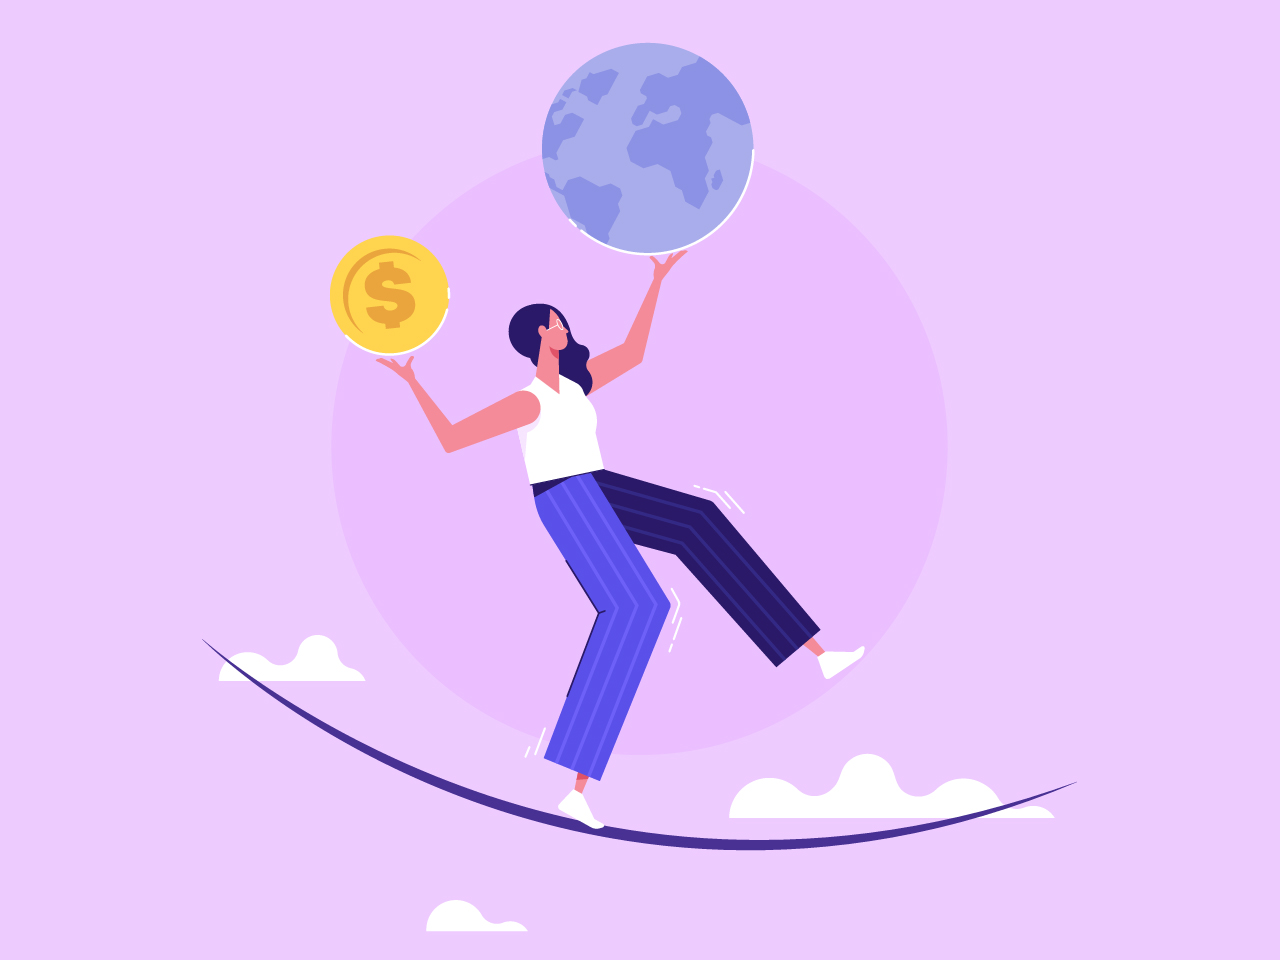 An illustration of a woman balancing on one leg on a scale while holding a dollar symbol in one hand and a globe in the other on a pink background with clouds